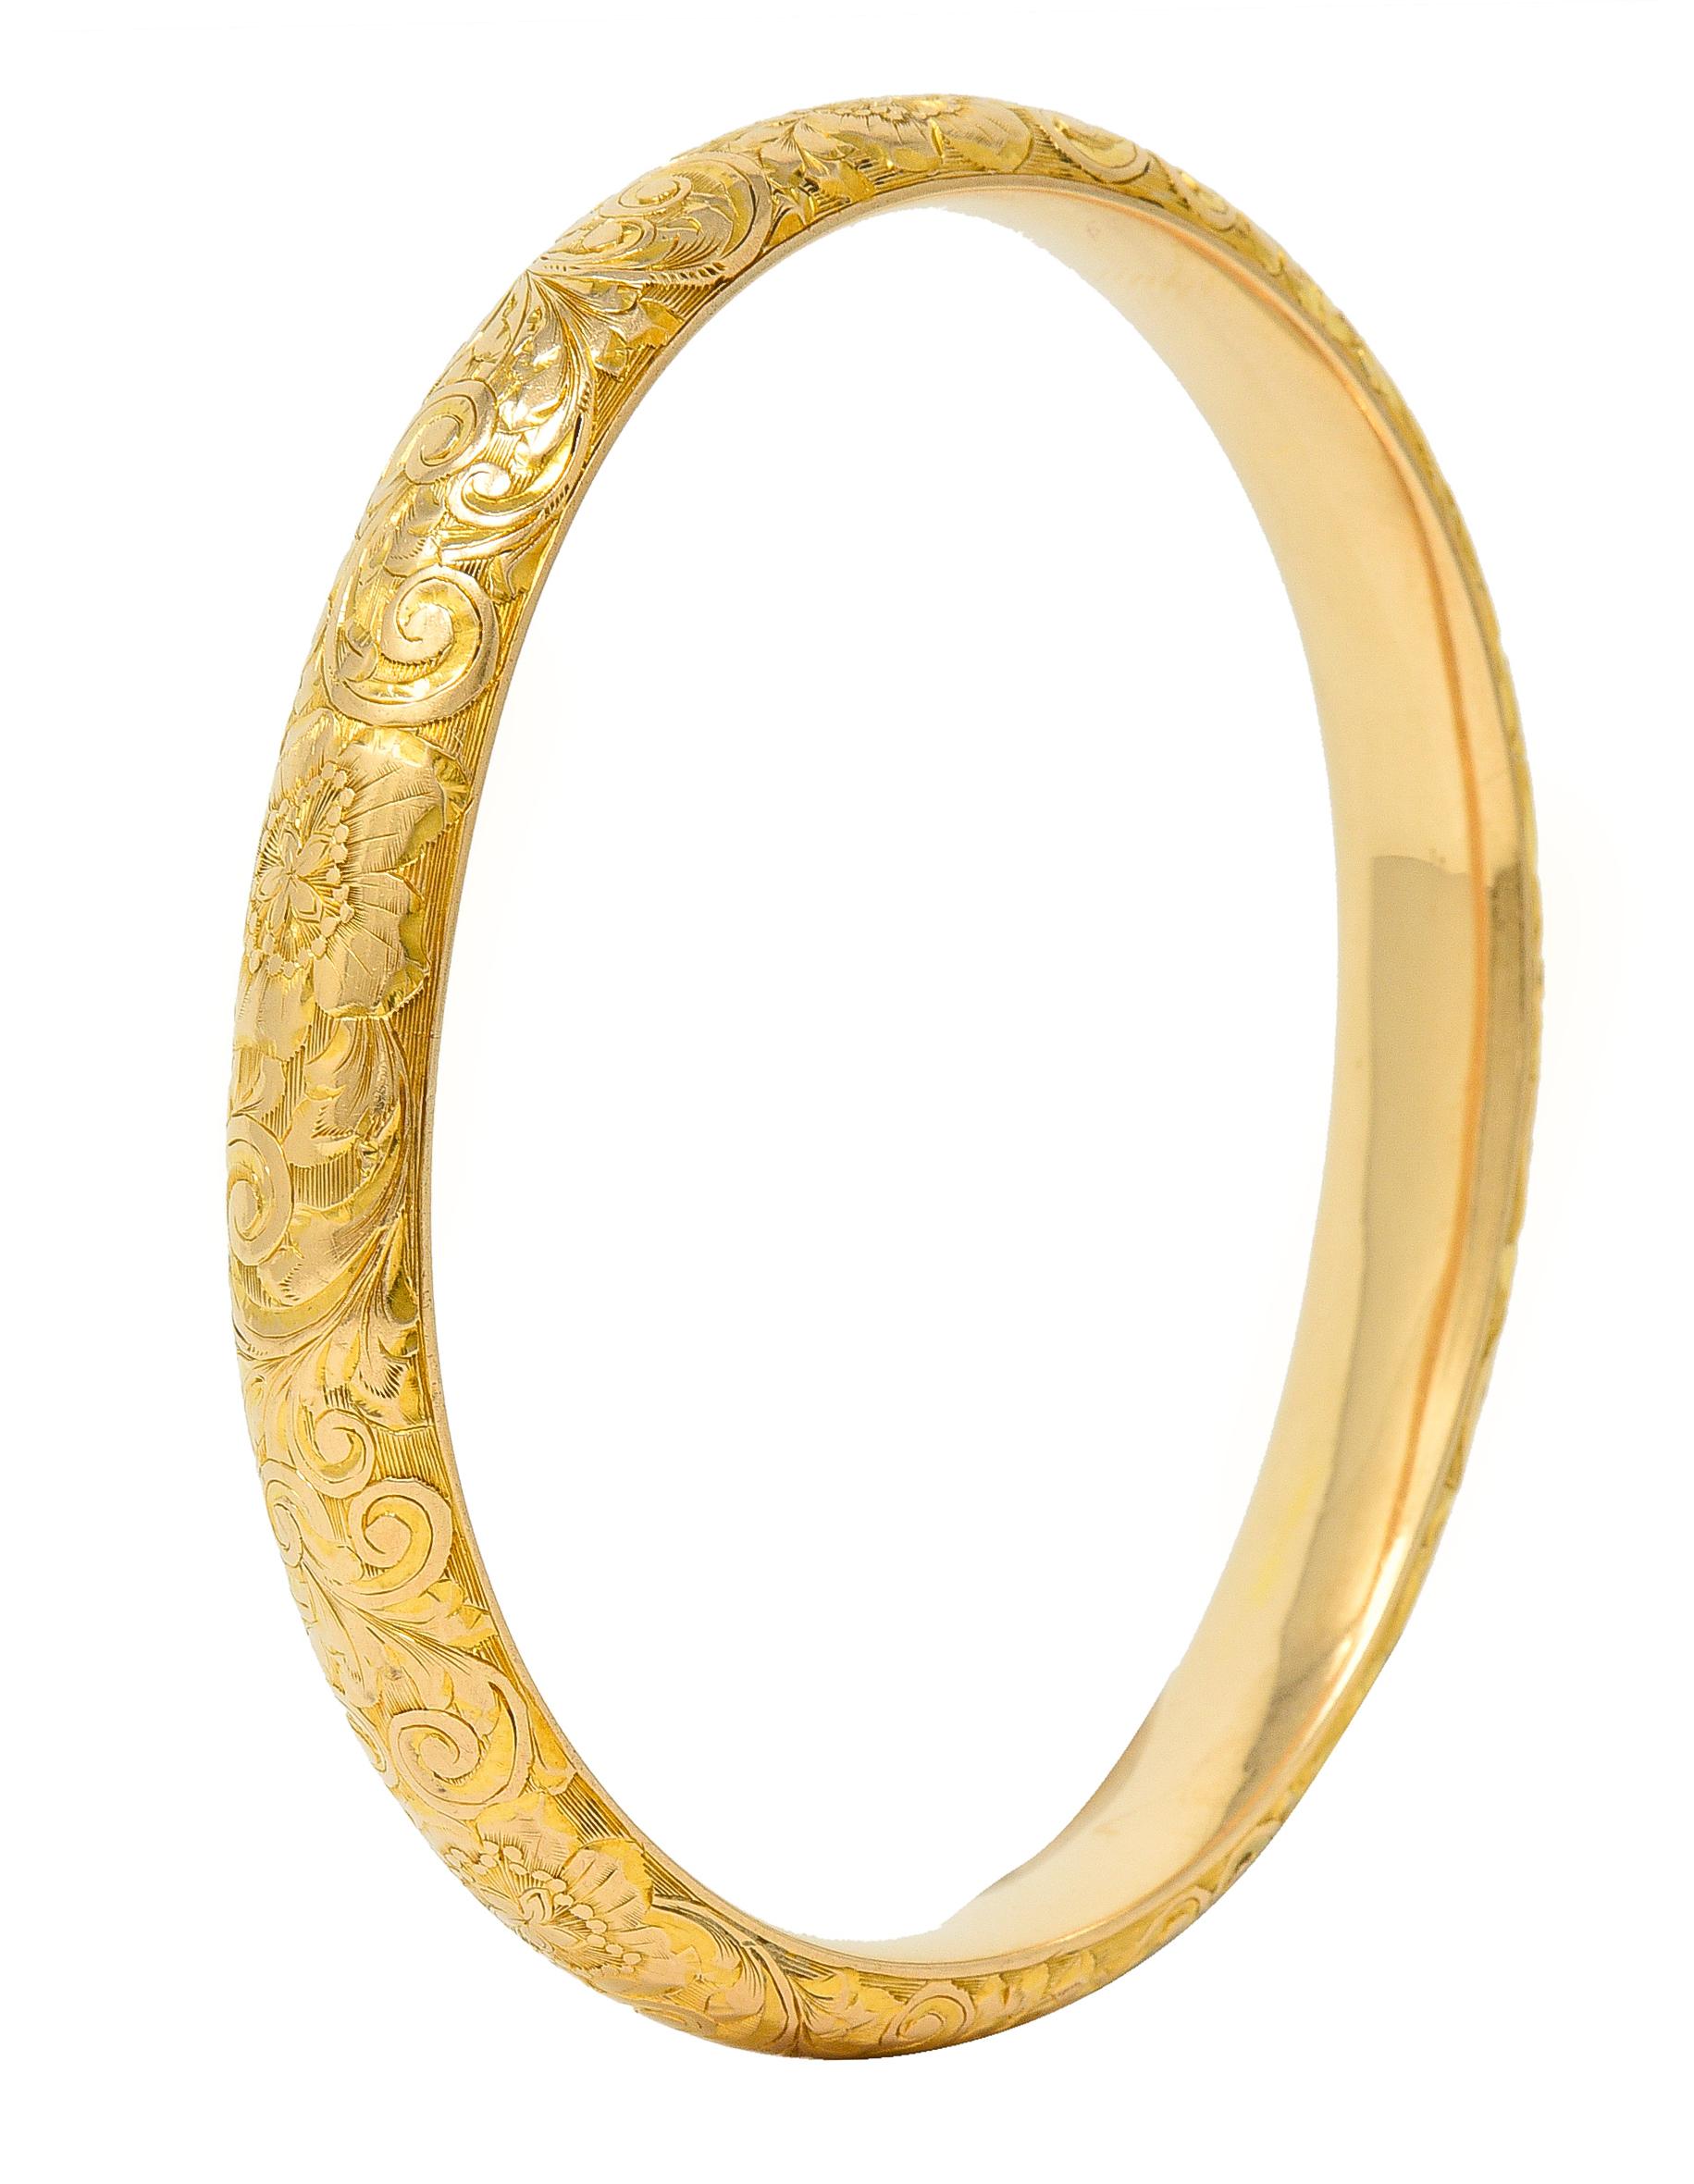 Designed as a curved bangle with an engraved scroll motif fully around
Featuring orange blossom flowers engraved throughout 
With linear texture throughout 
Stamped for 14 karat gold 
With maker's mark for Riker Brothers
Circa: 1905
Width at widest: